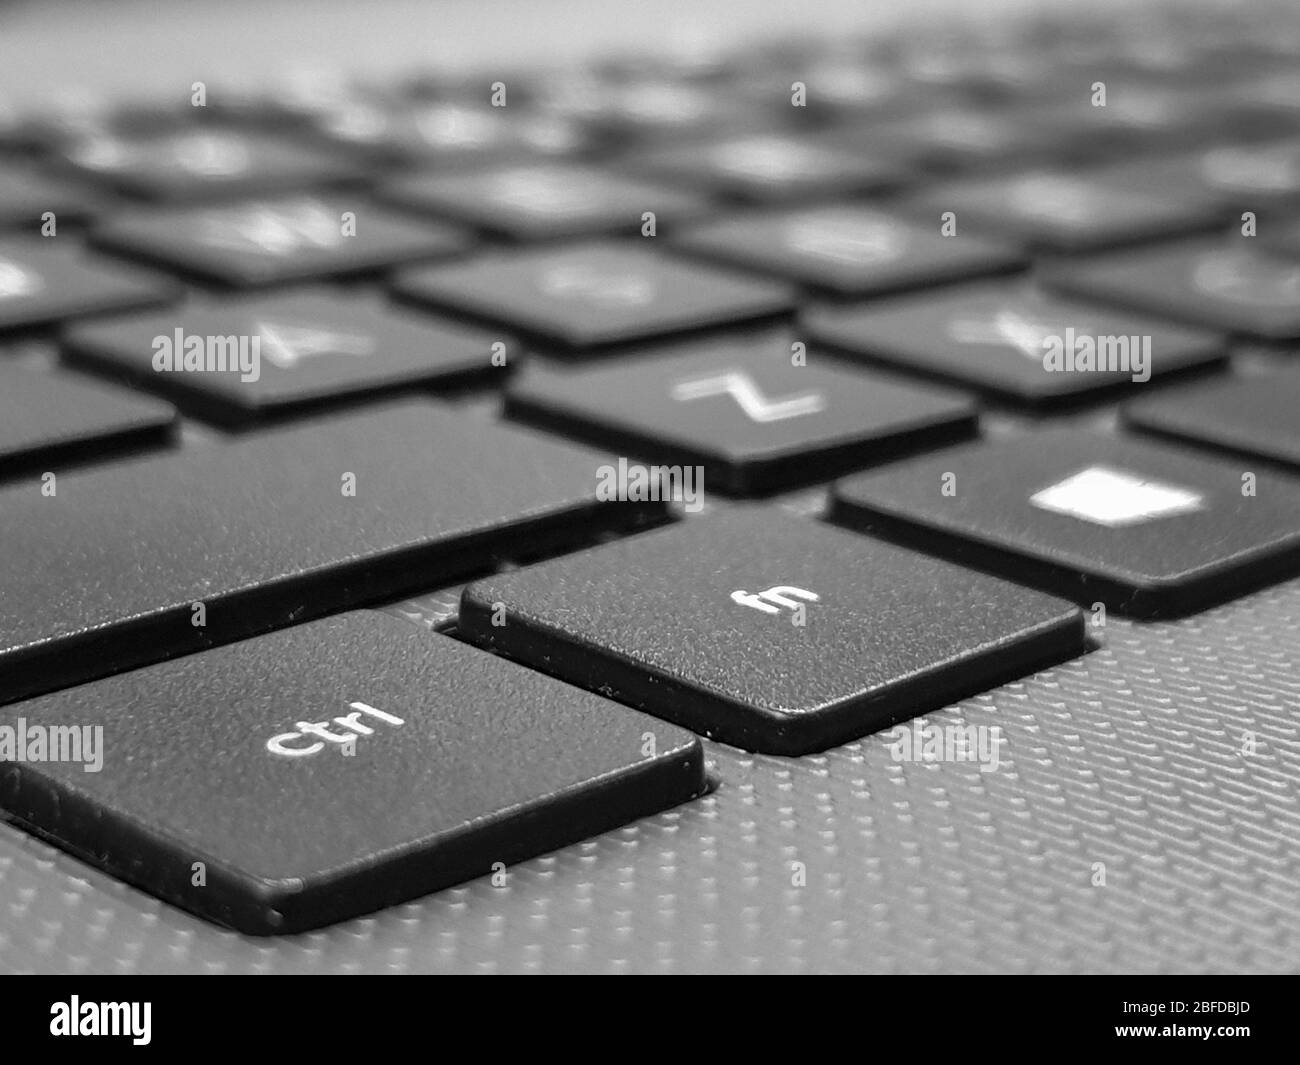 A close up view of a computer keyboard, focussed on the ctrl key, with the shallow depth of field fading into the background. Stock Photo